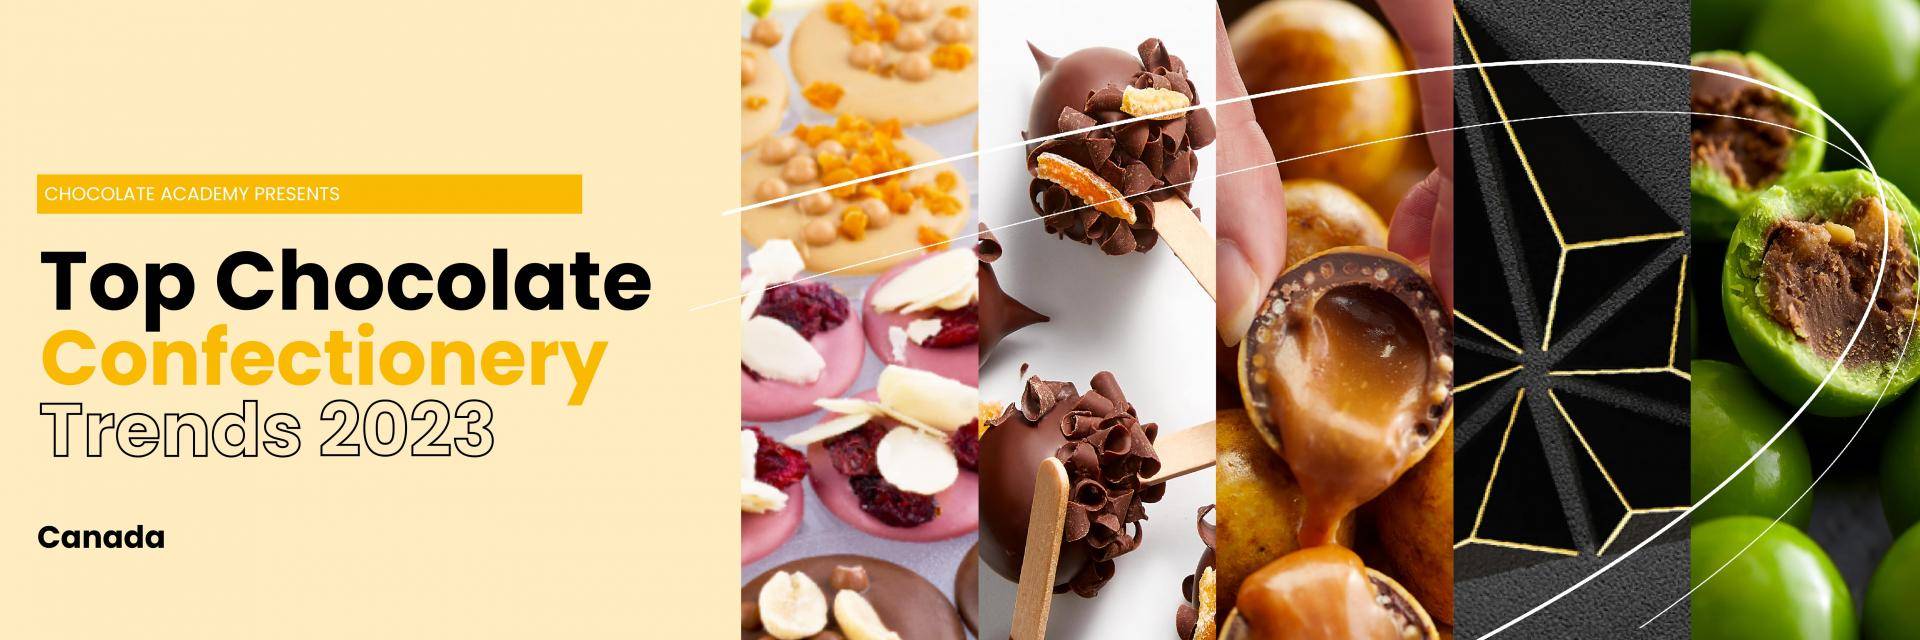 top chocolate trends banner